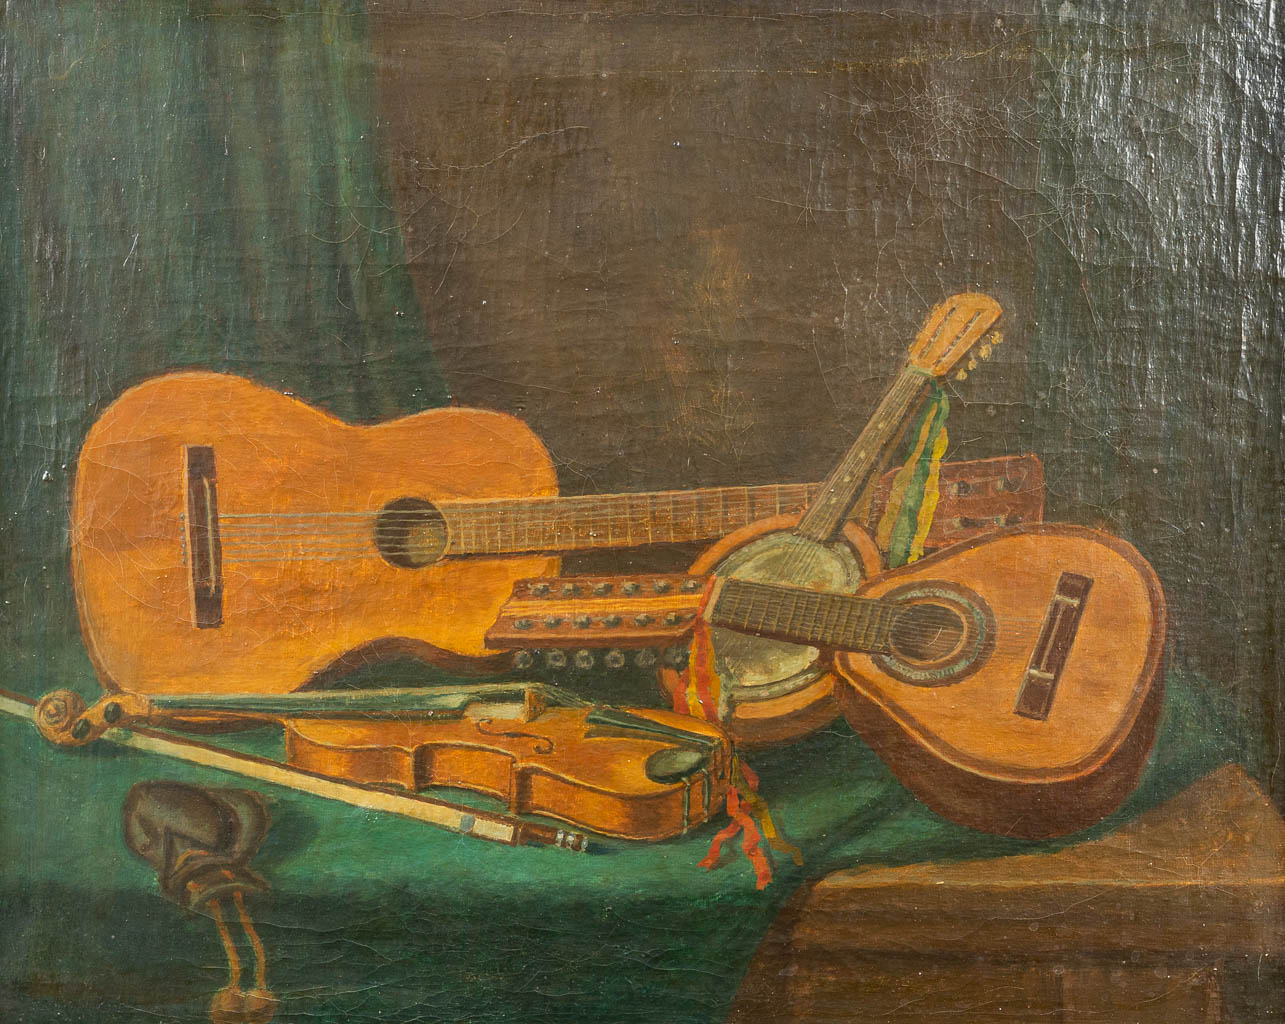 No signature found, a painting of musical instruments, oil on canvas. (49 x 39 cm)